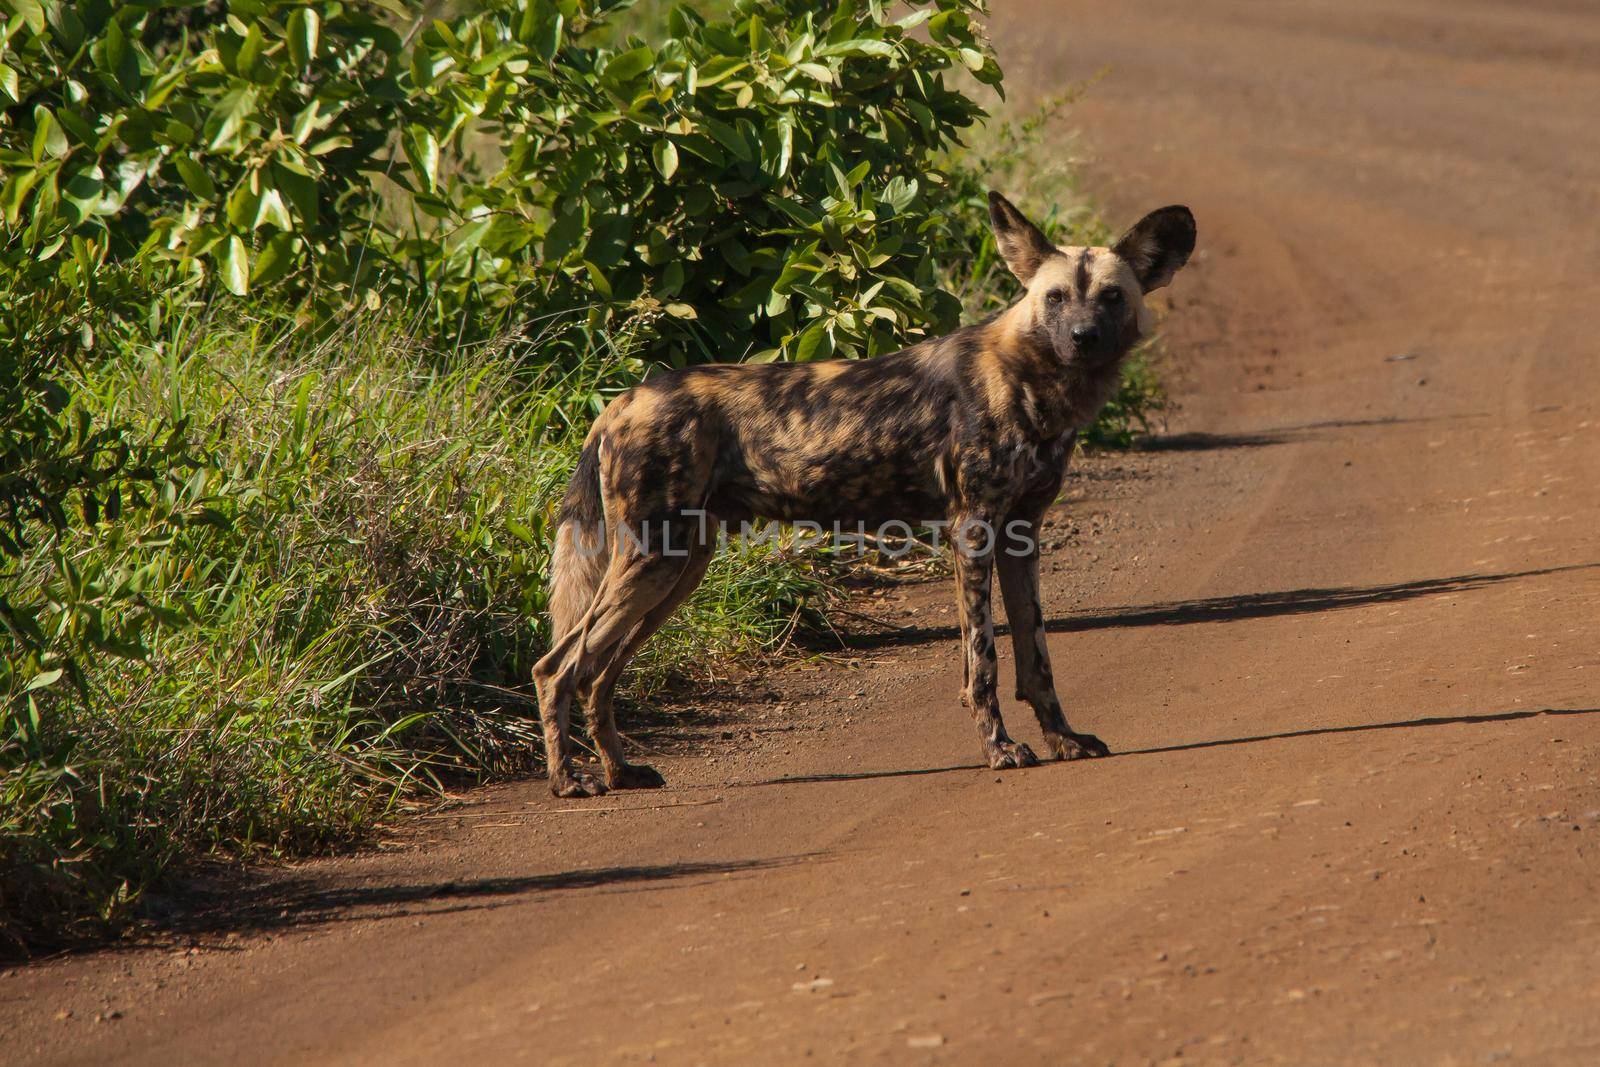 African Wild Dog (Lycaon pictus) 15252 by kobus_peche